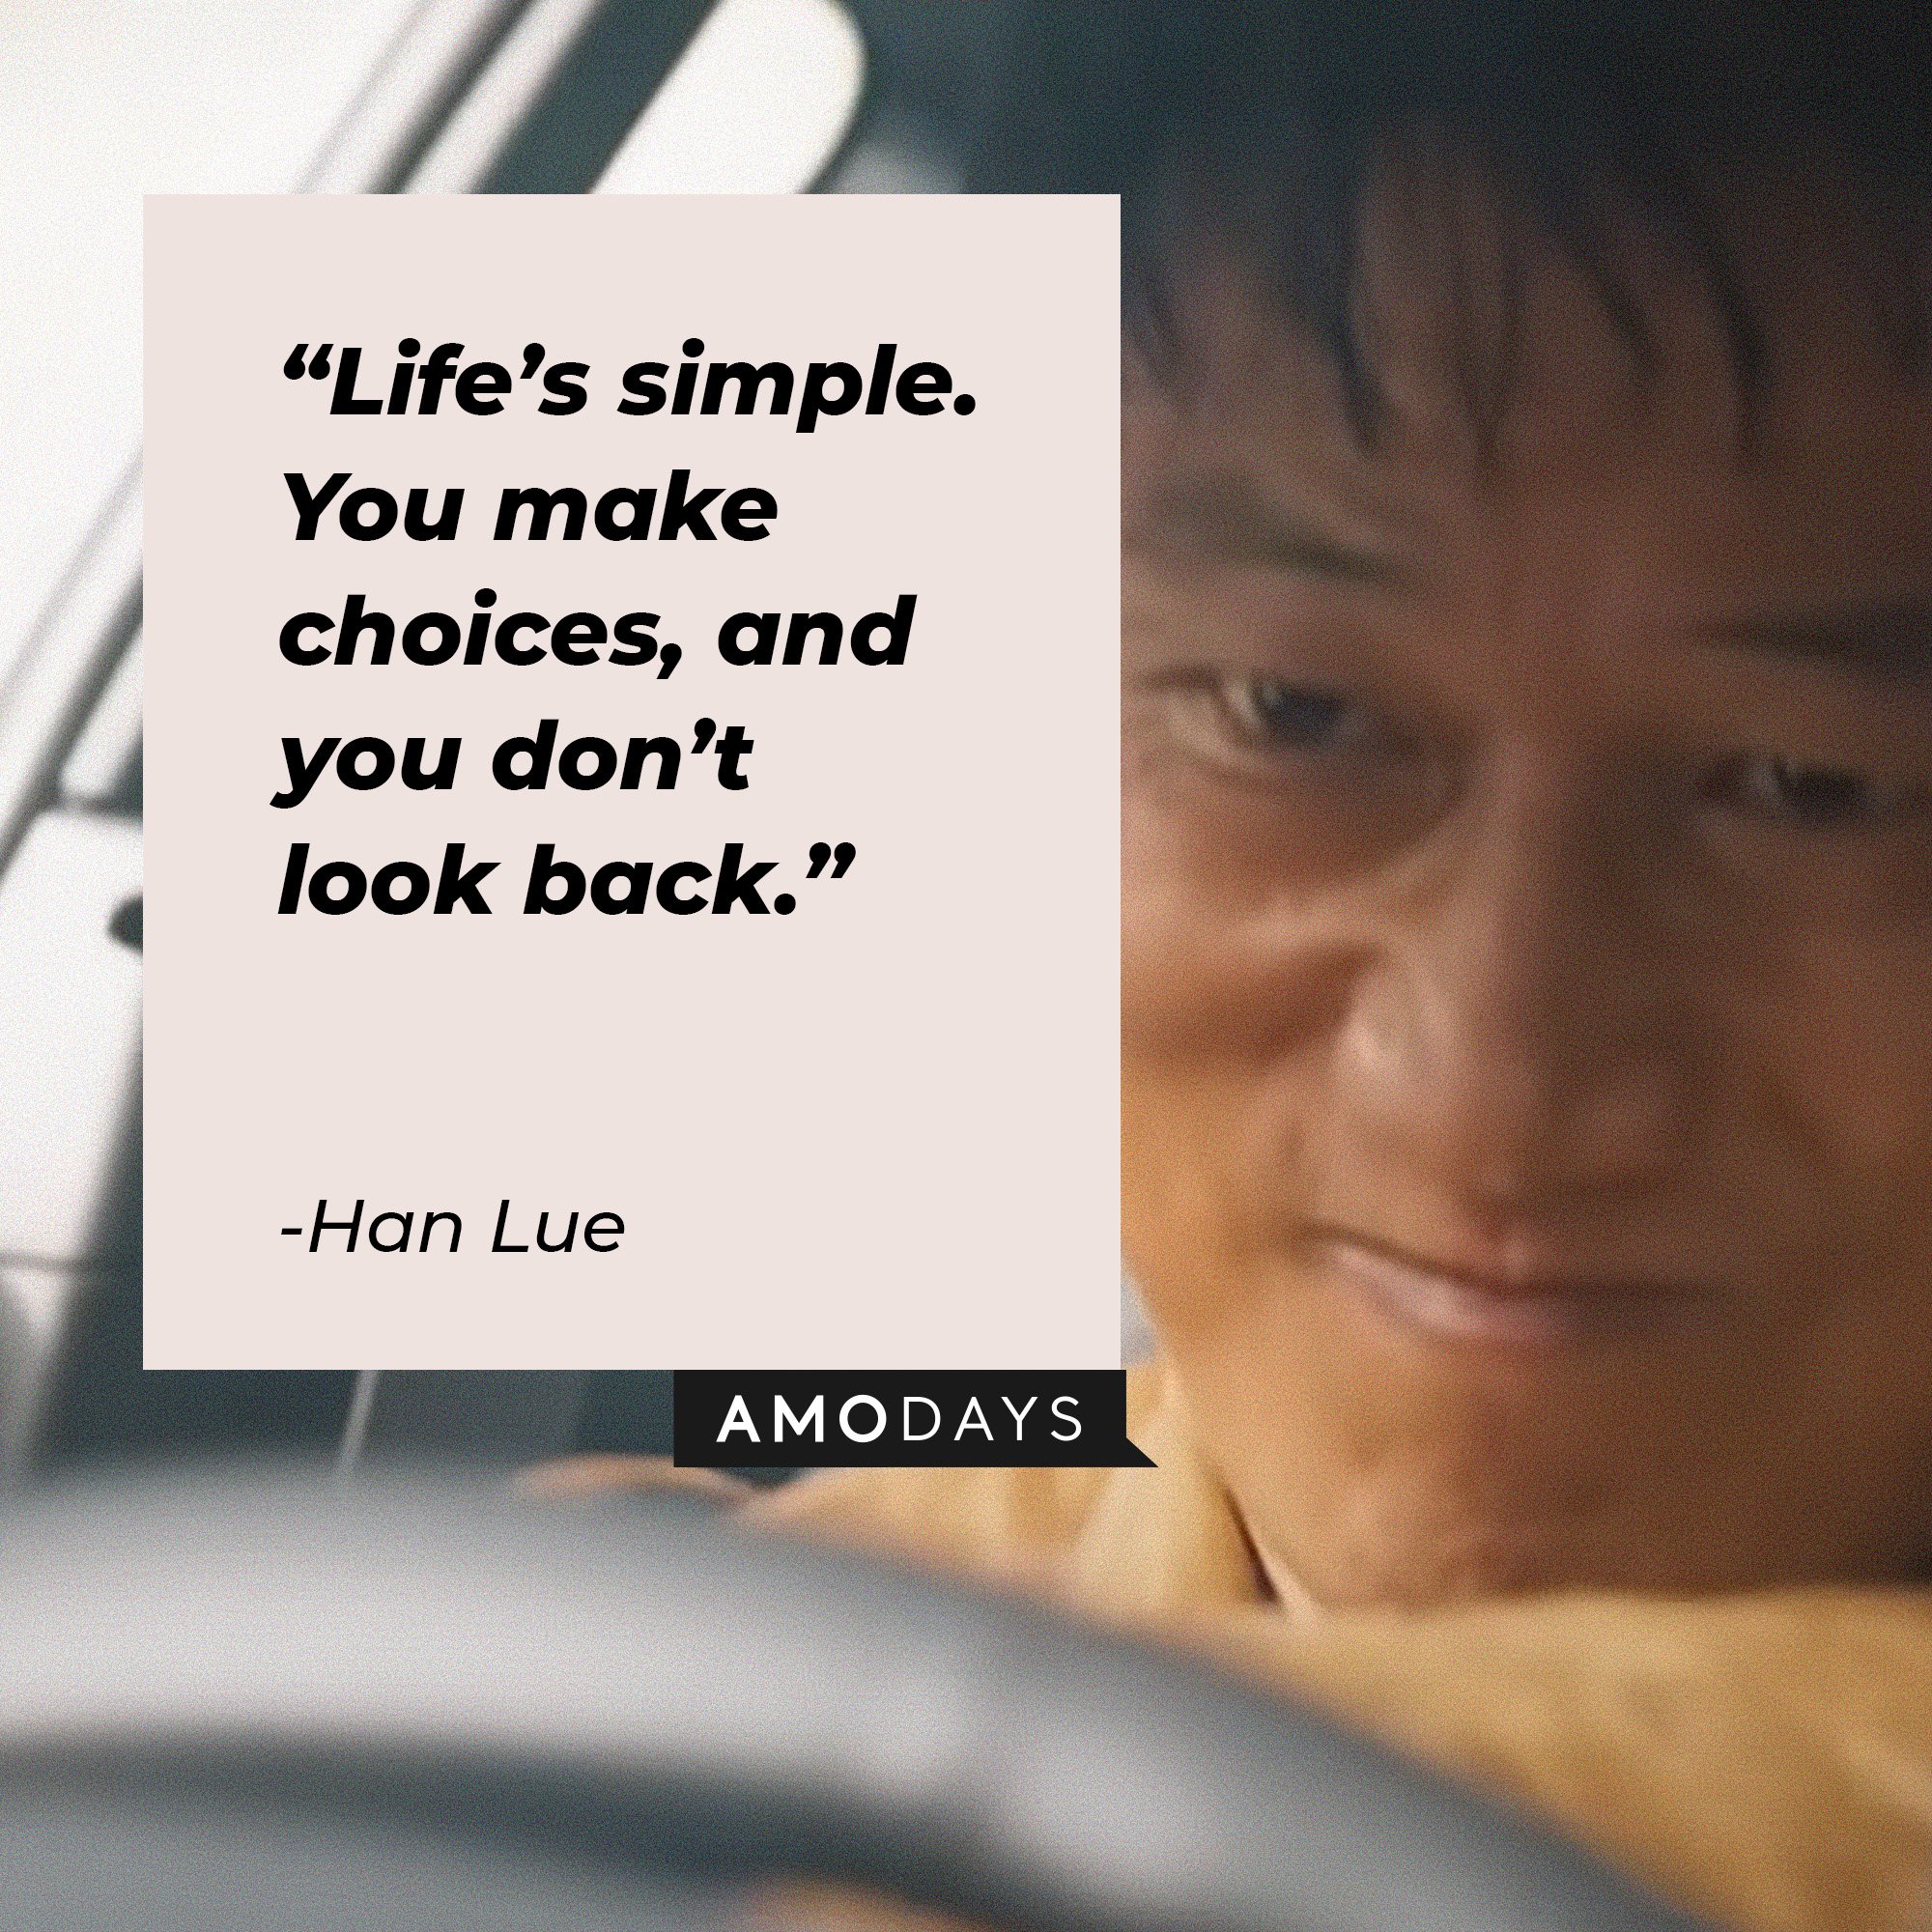 Han Lue's quote: “Life’s simple. You make choices, and you don’t look back.” │Image: AmoDays